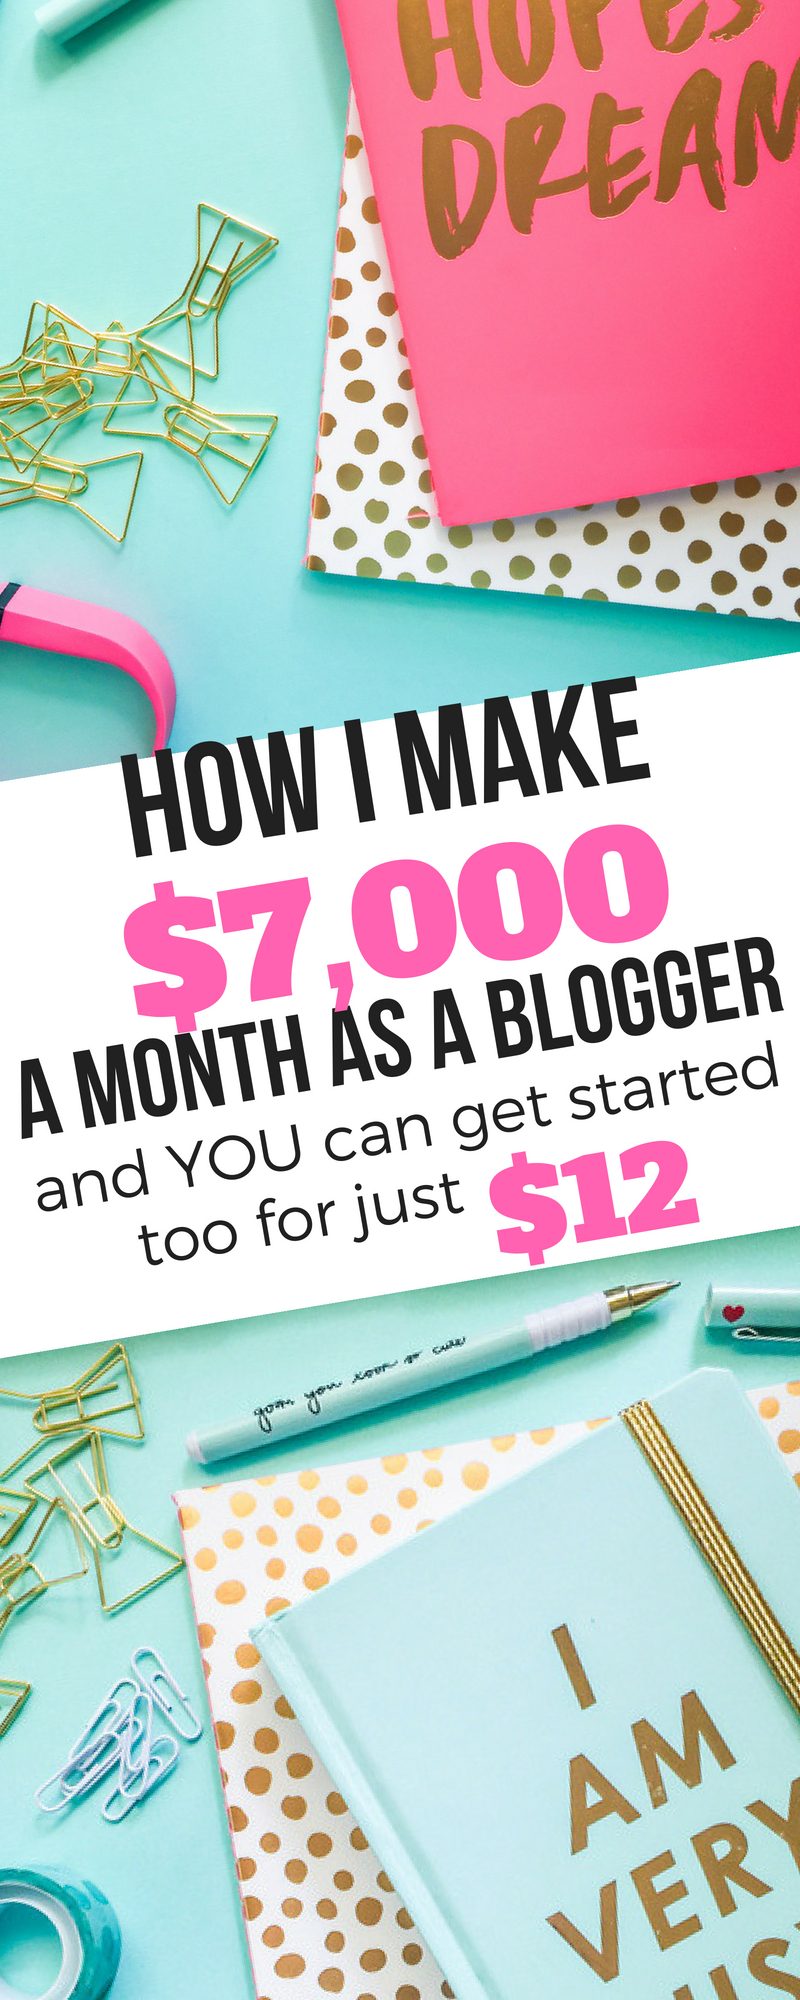 Start Your Blog 1 How to Start a Mommy Blog This is about how to start a mommy blog and become a work at home mom.  Learn my secrets to generating a full time income while working part time being a mommy blogger. I make $3,000-$7,500 every month as a lifestyle blogger - learn how you can too and get started blogging today with just a $12 investment to start your blog!